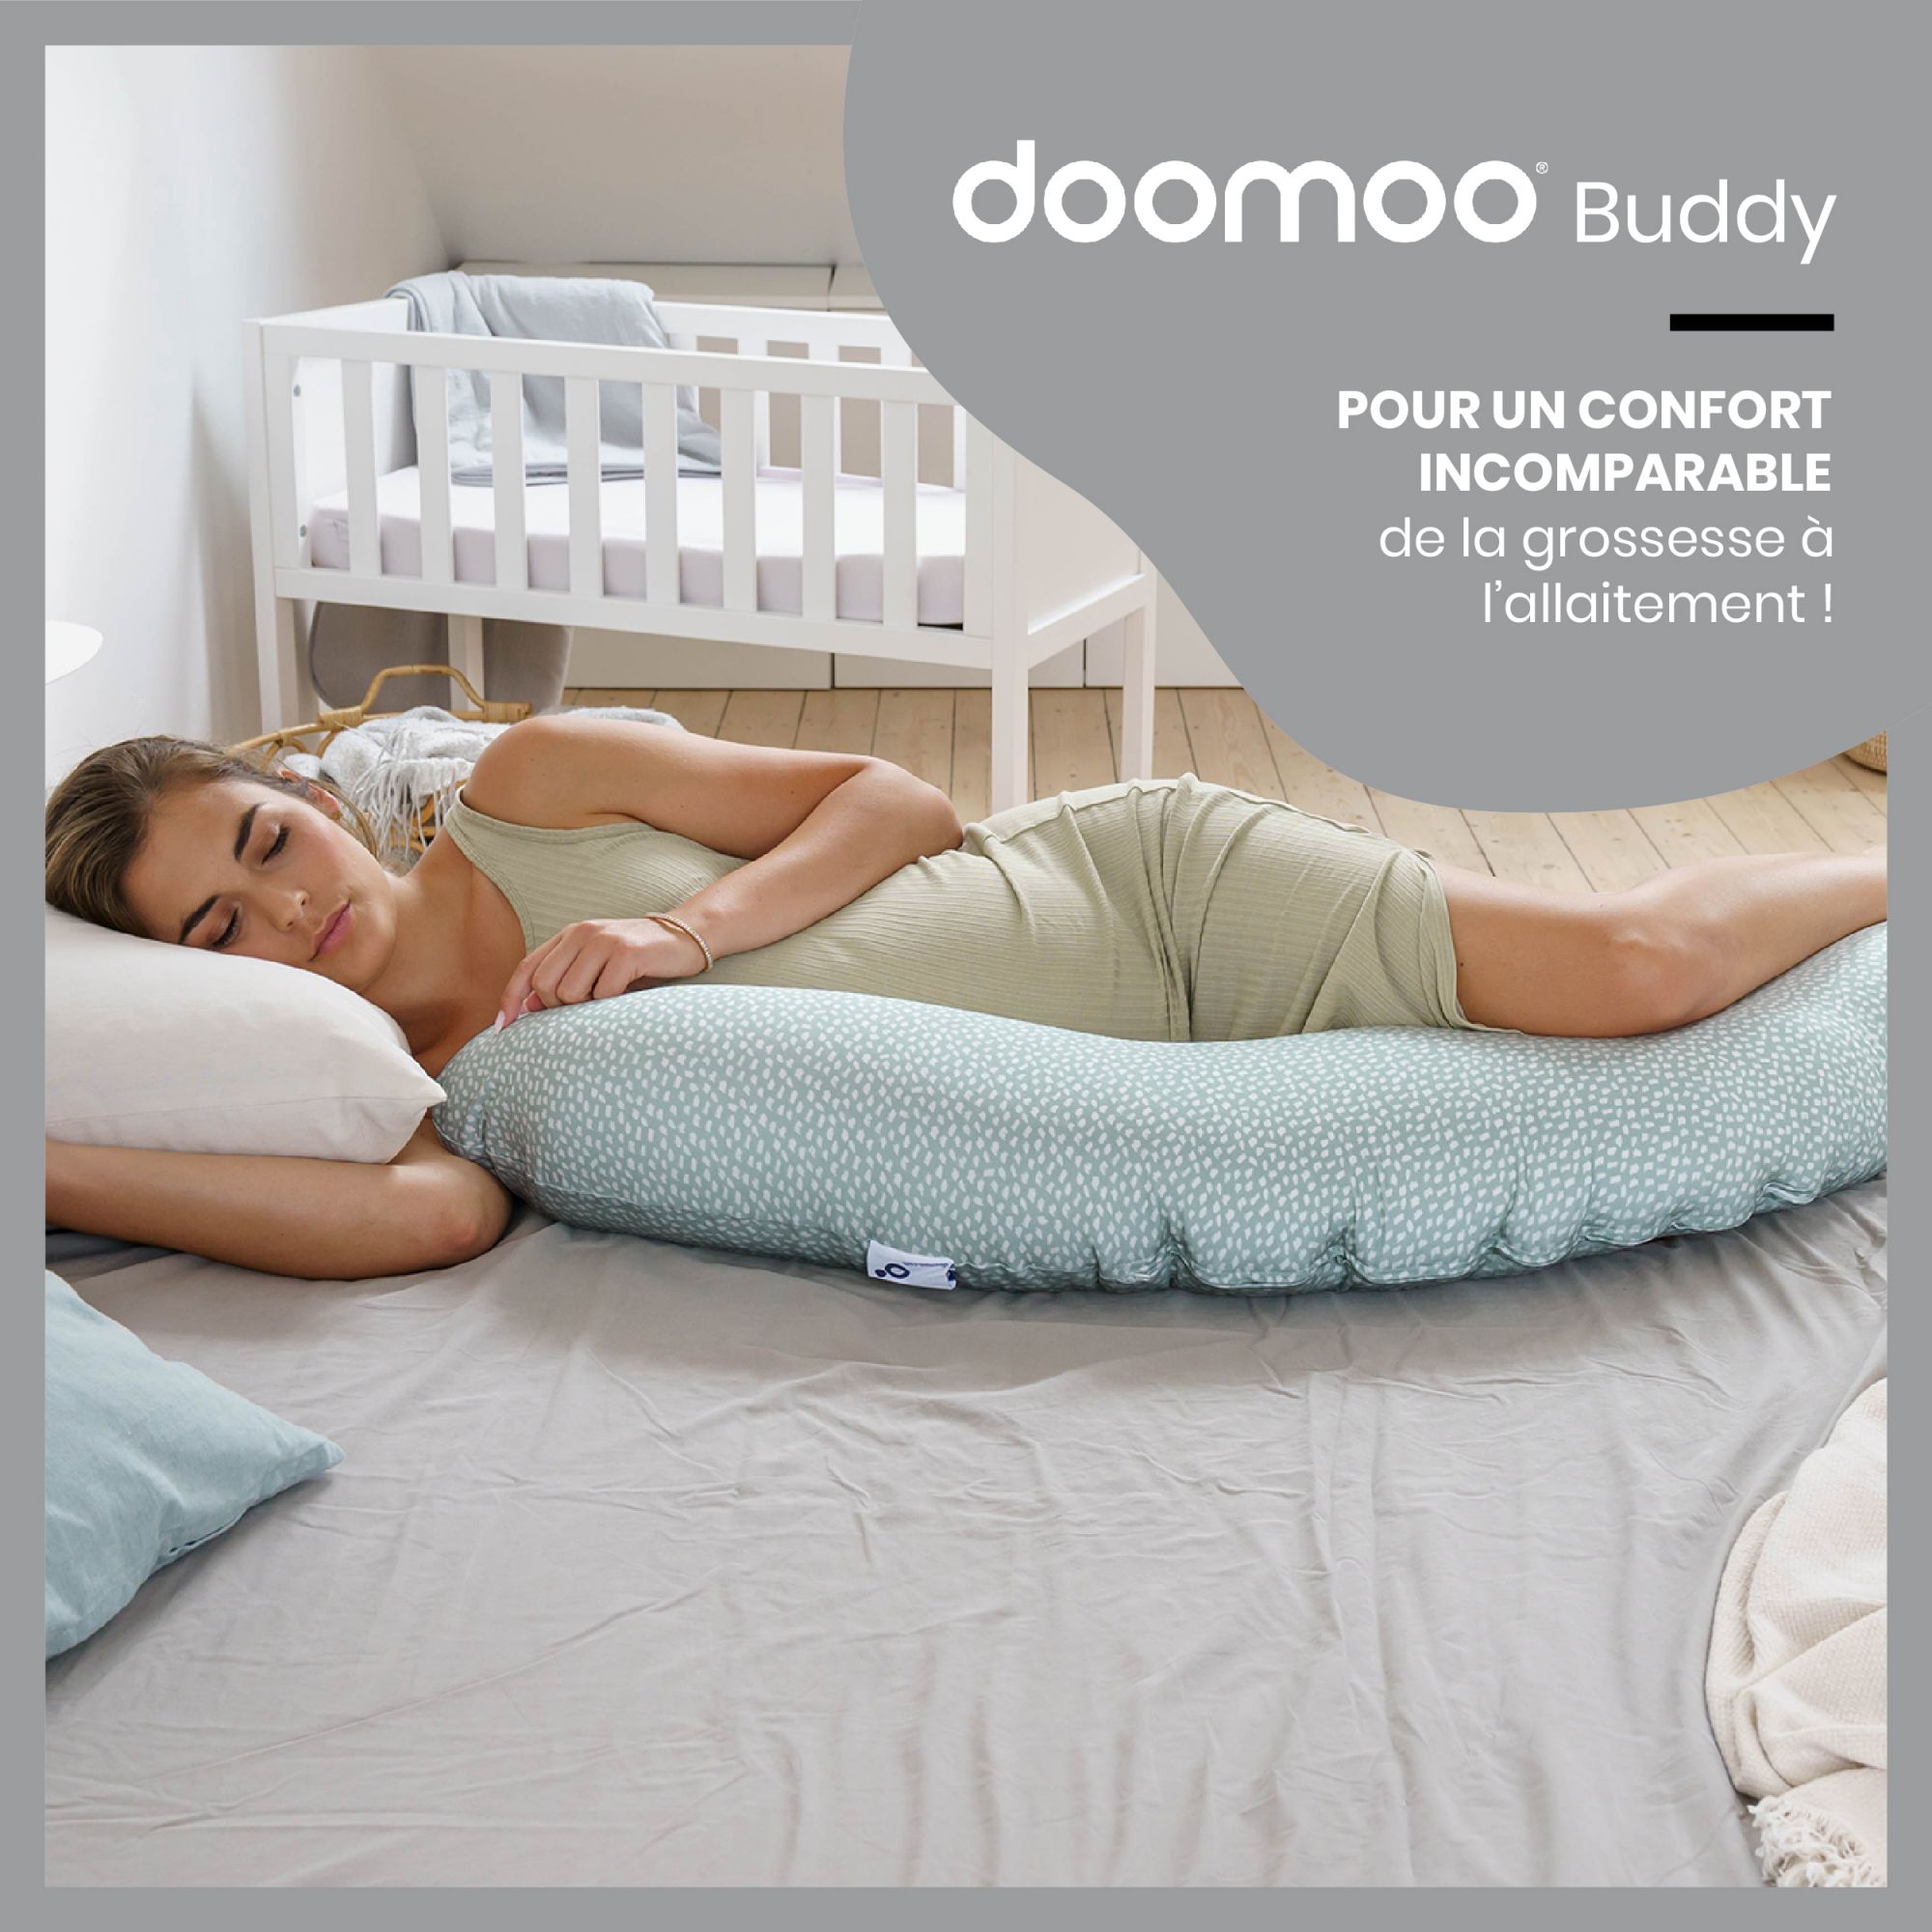 Coussin de maternité Doomoo Buddy - Risotto Taupe